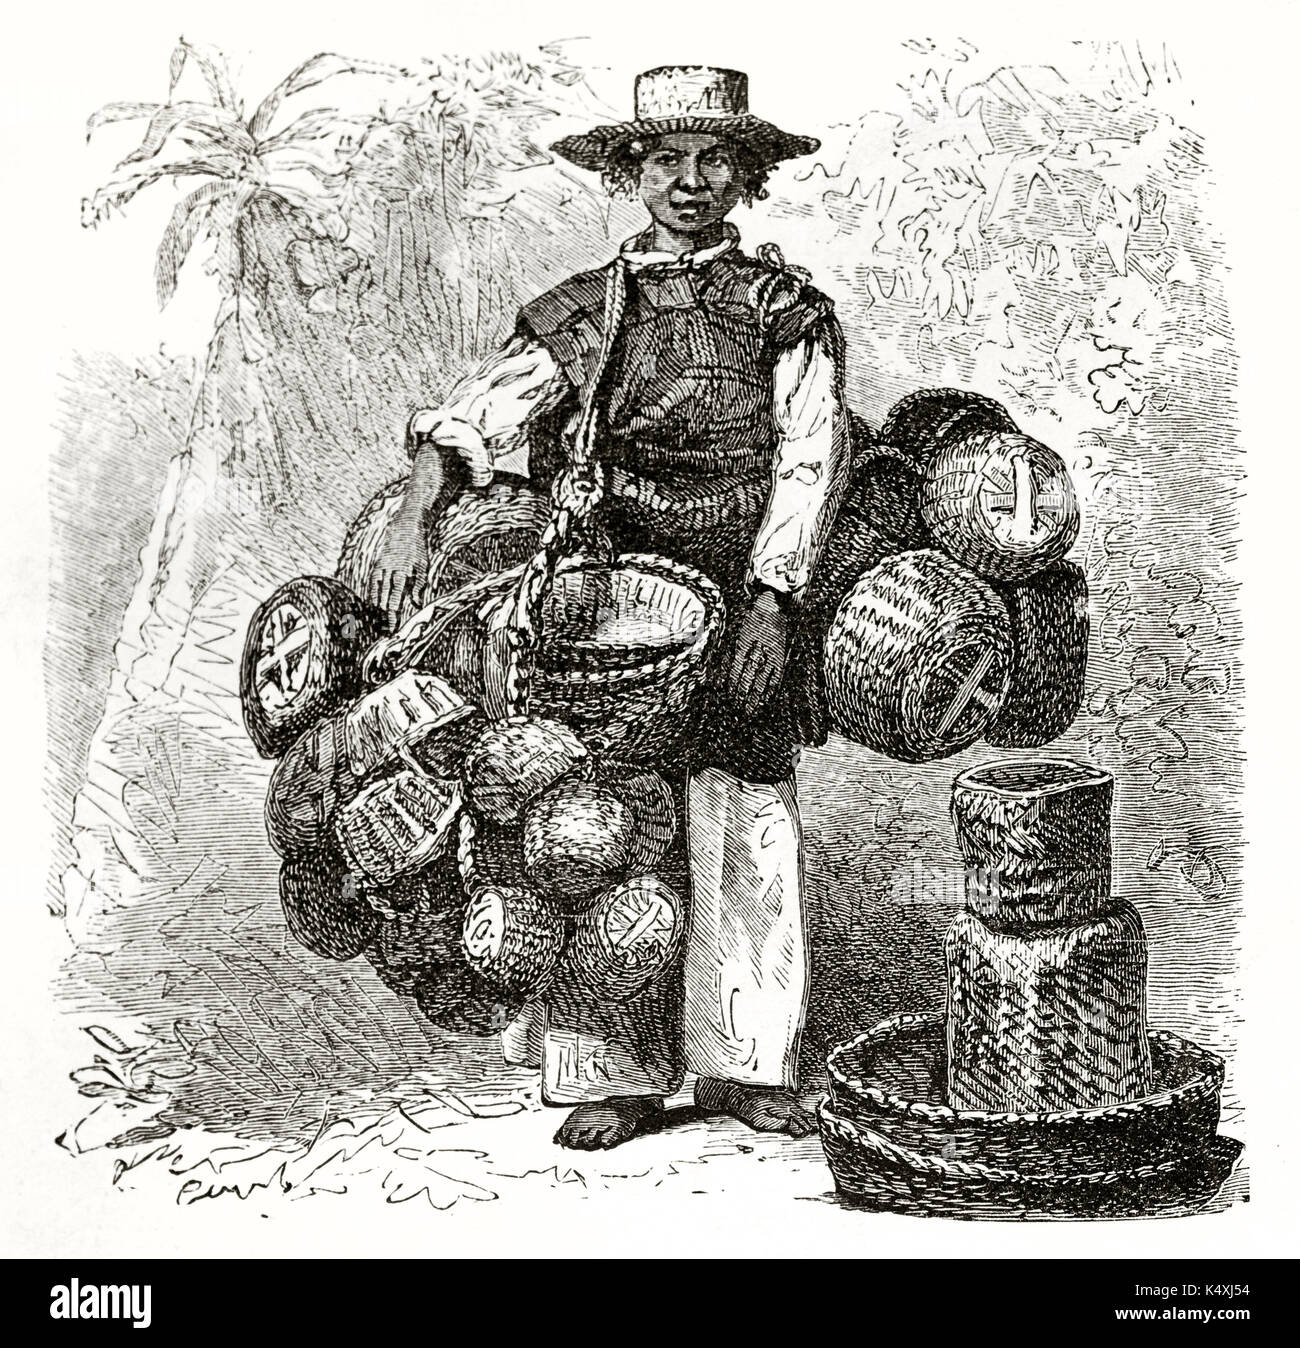 Ancient mexican guy transporting a lot of wicker baskets walking by feet. Old illustration of Mexican basket merchant. Created by Riou and Maurand published on Le Tour du Monde Paris 1862 Stock Photo